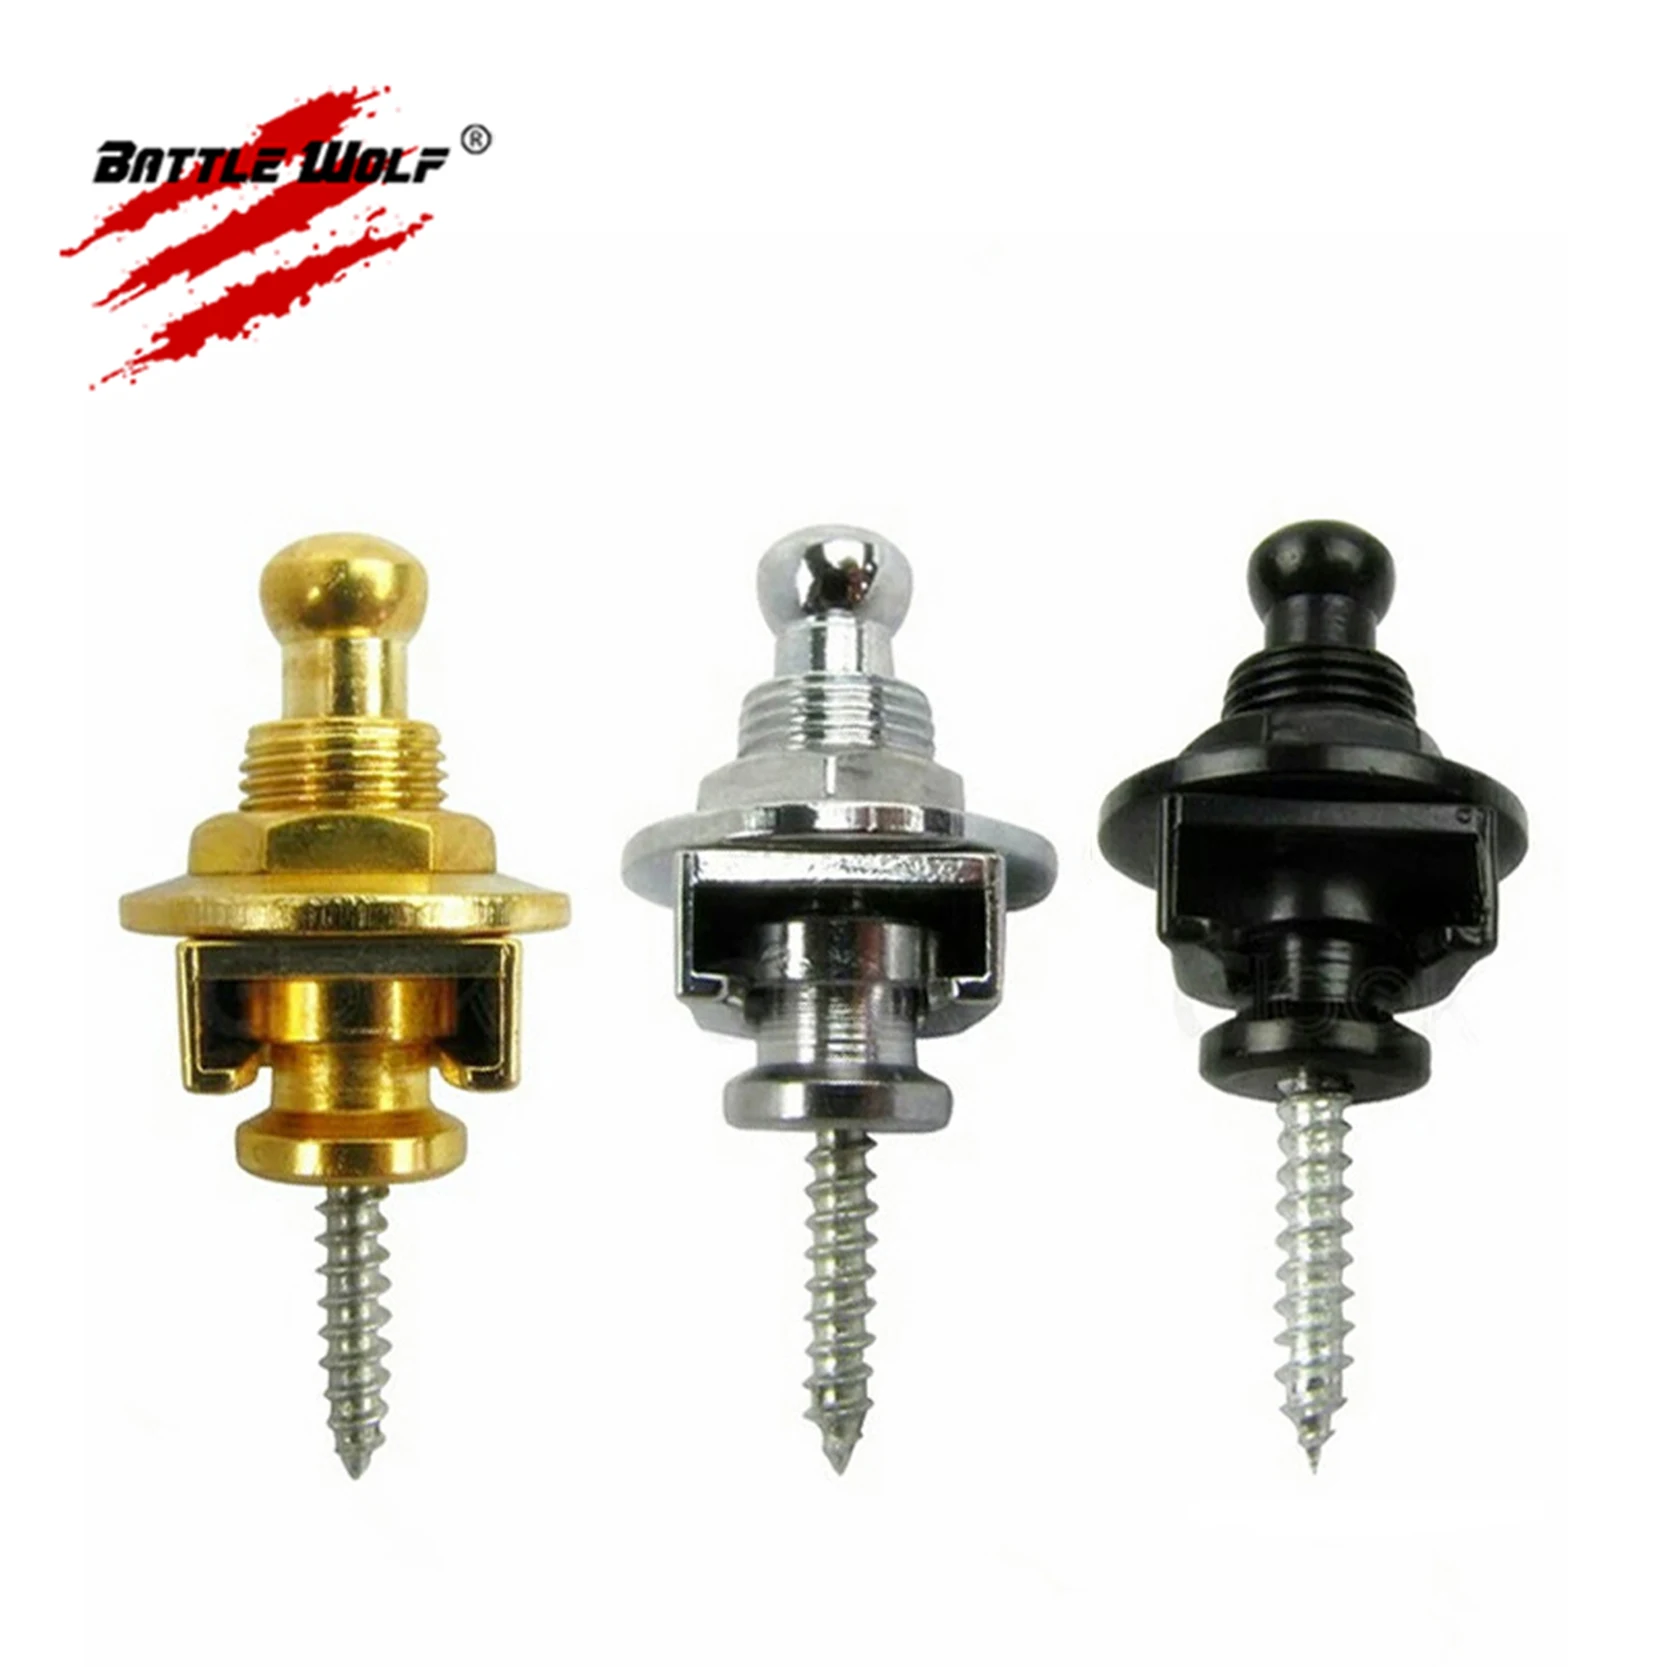 

High Quality Anti-Skid Easy Operation Amazon Hot Sale Guitar Strap Lock Pins Parts, Black silver gold